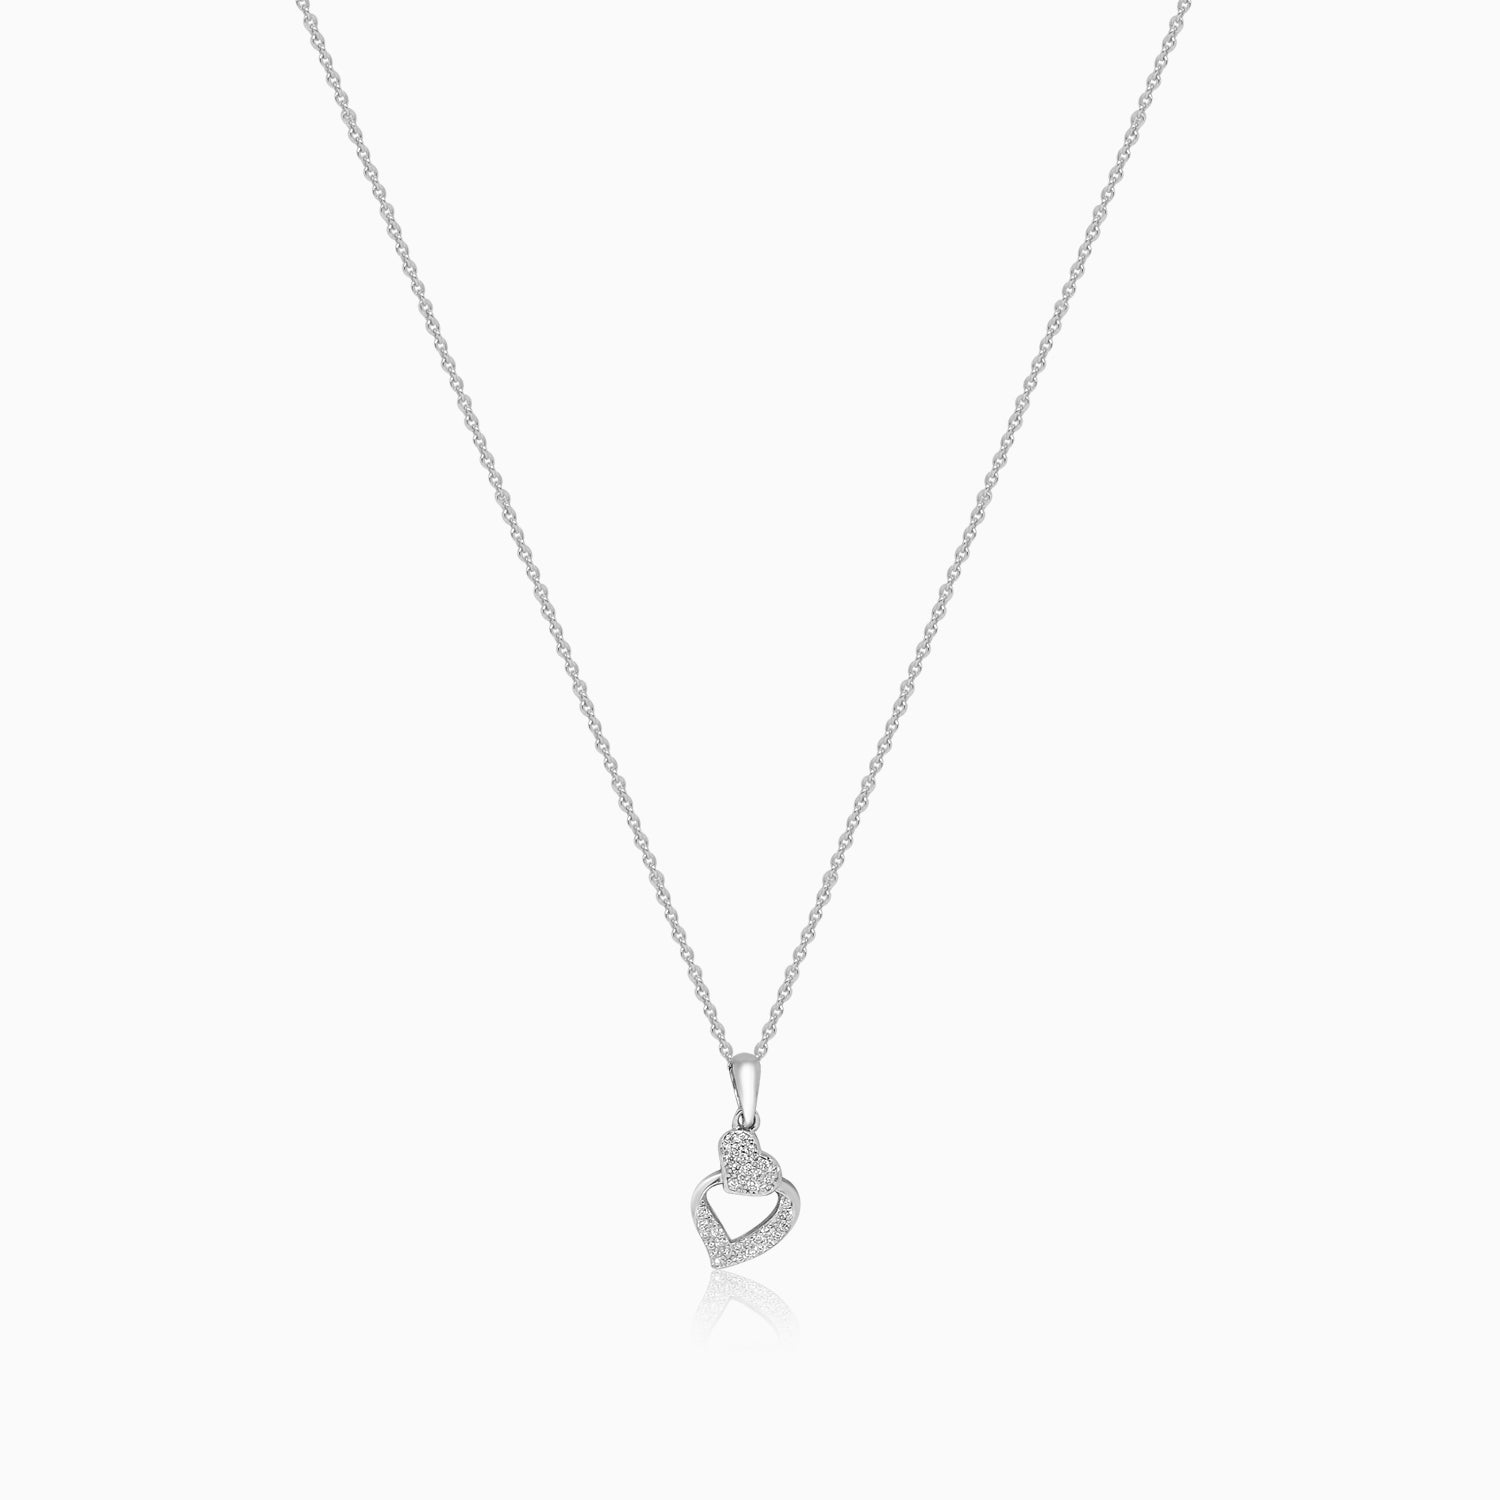 Silver Sparkling Heart Fall in Love Necklace